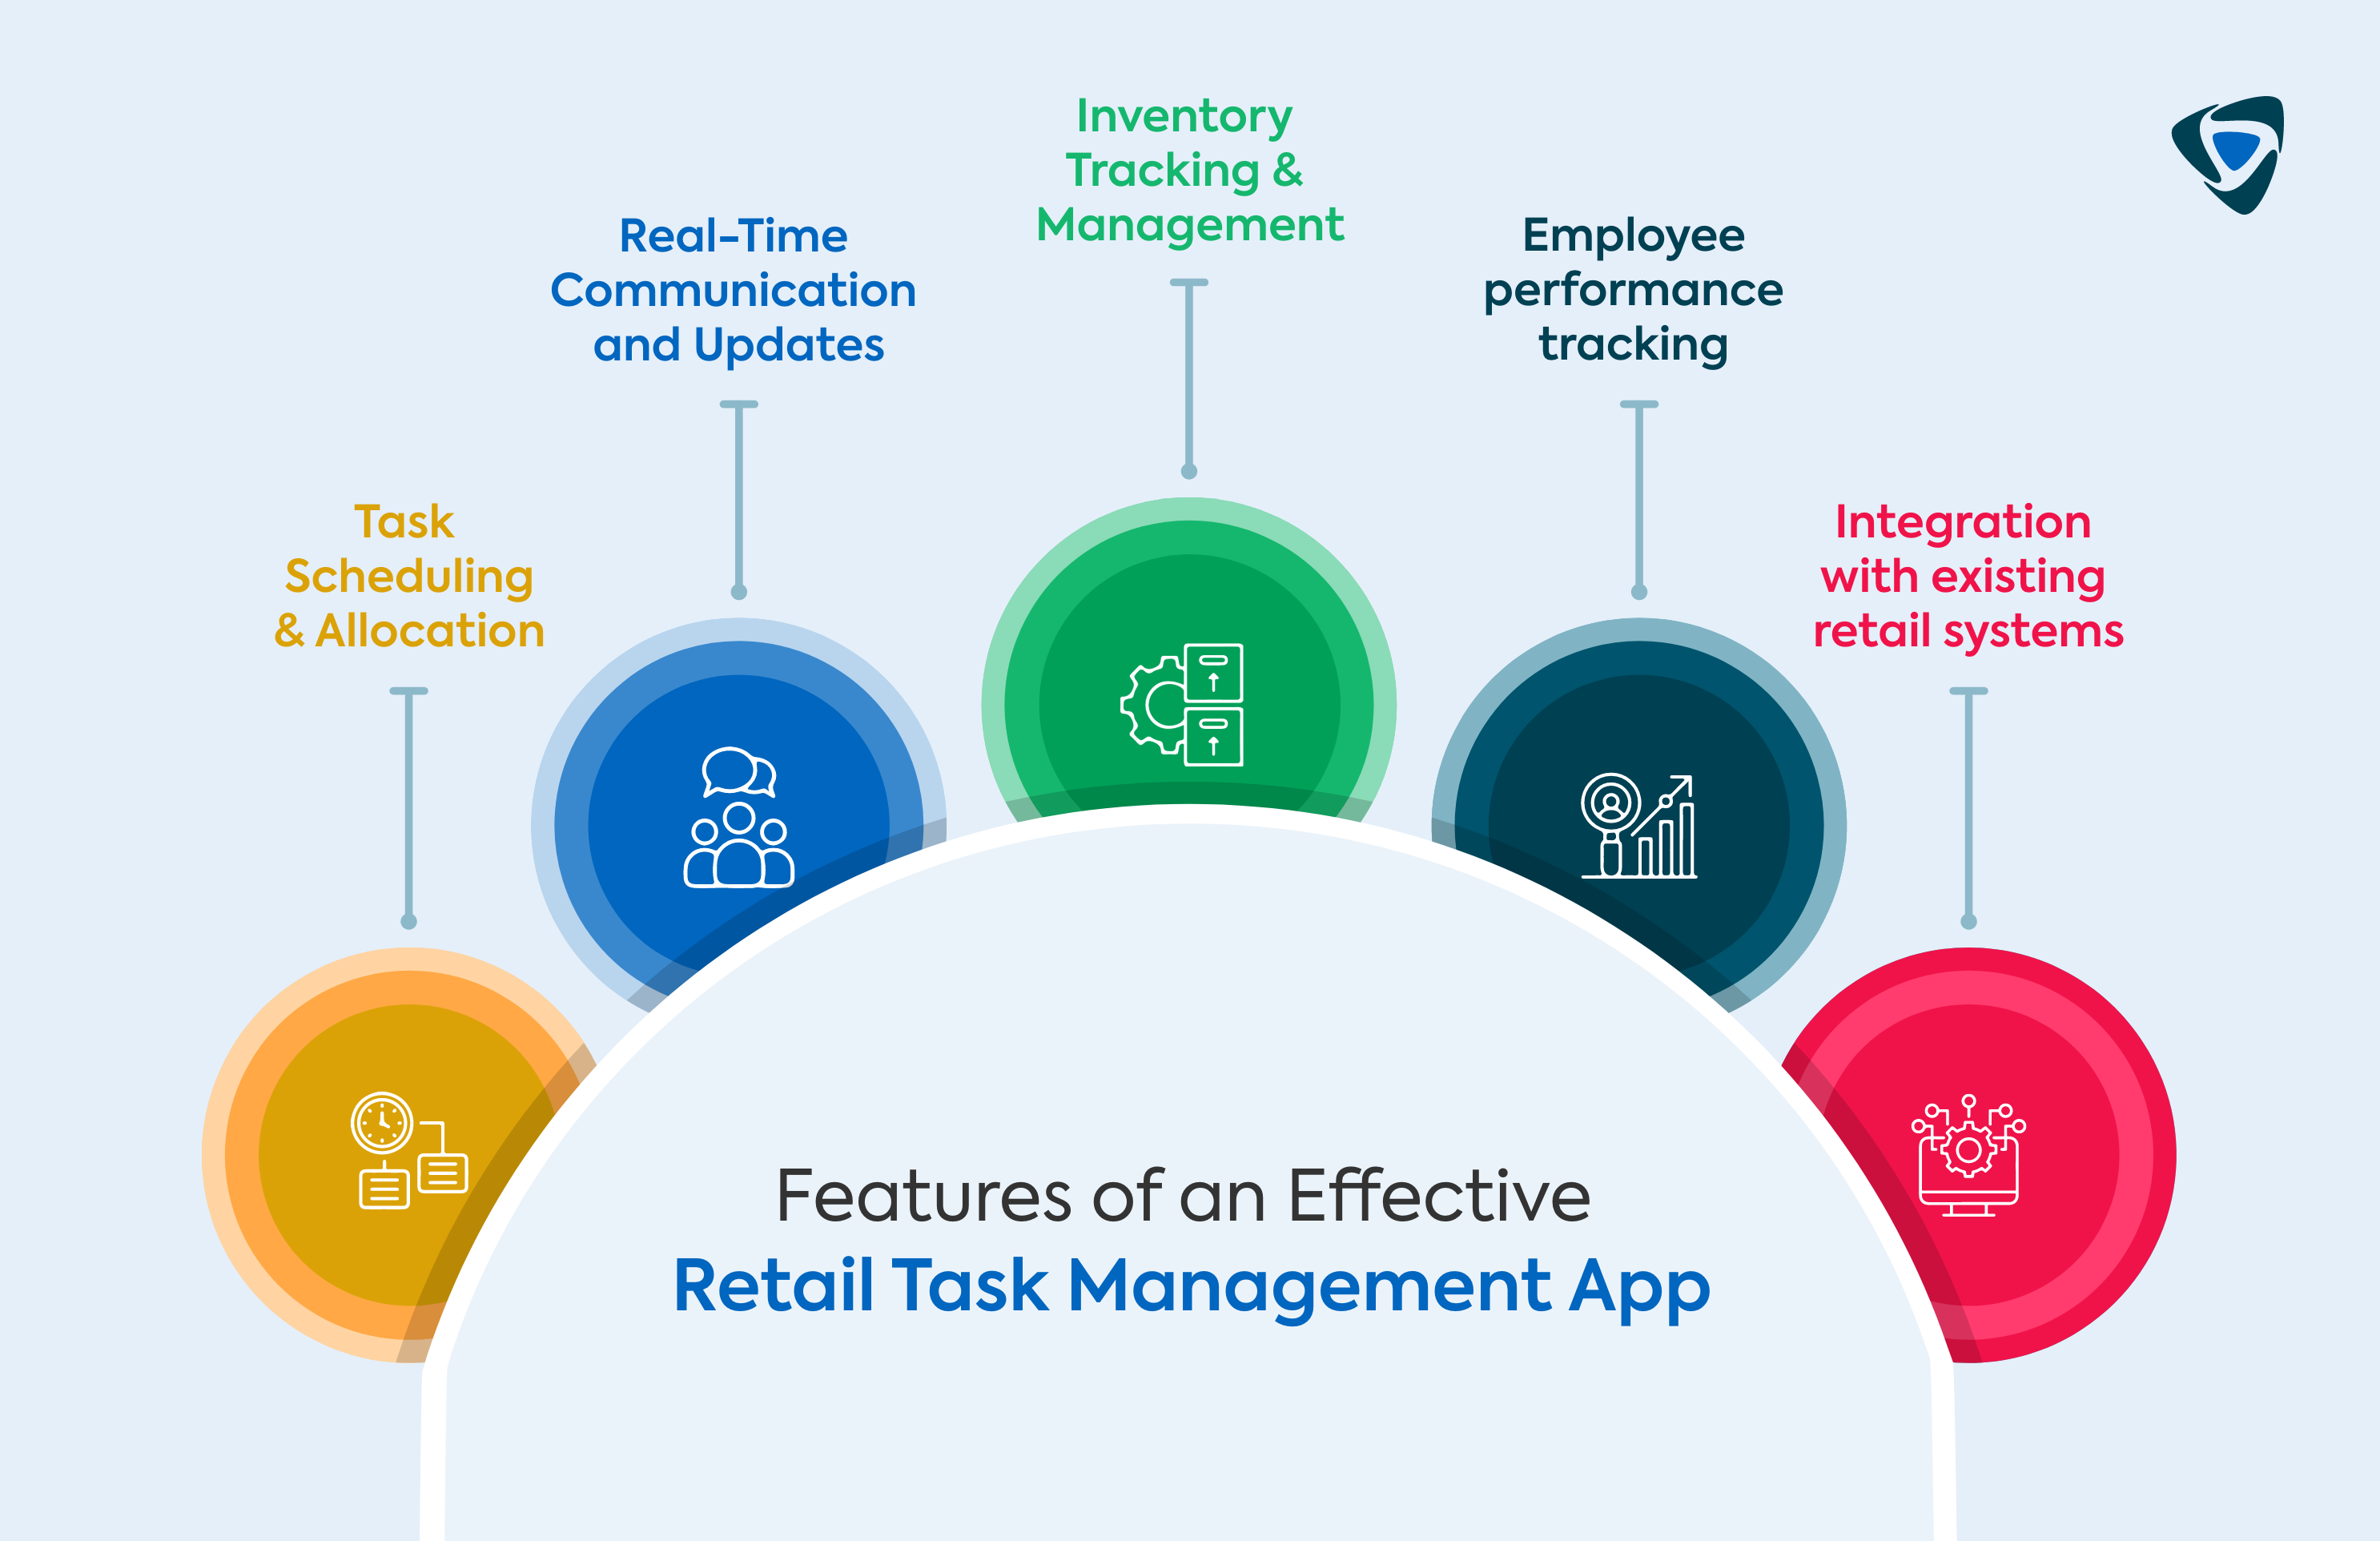 Features of an Effective Retail Task Management App